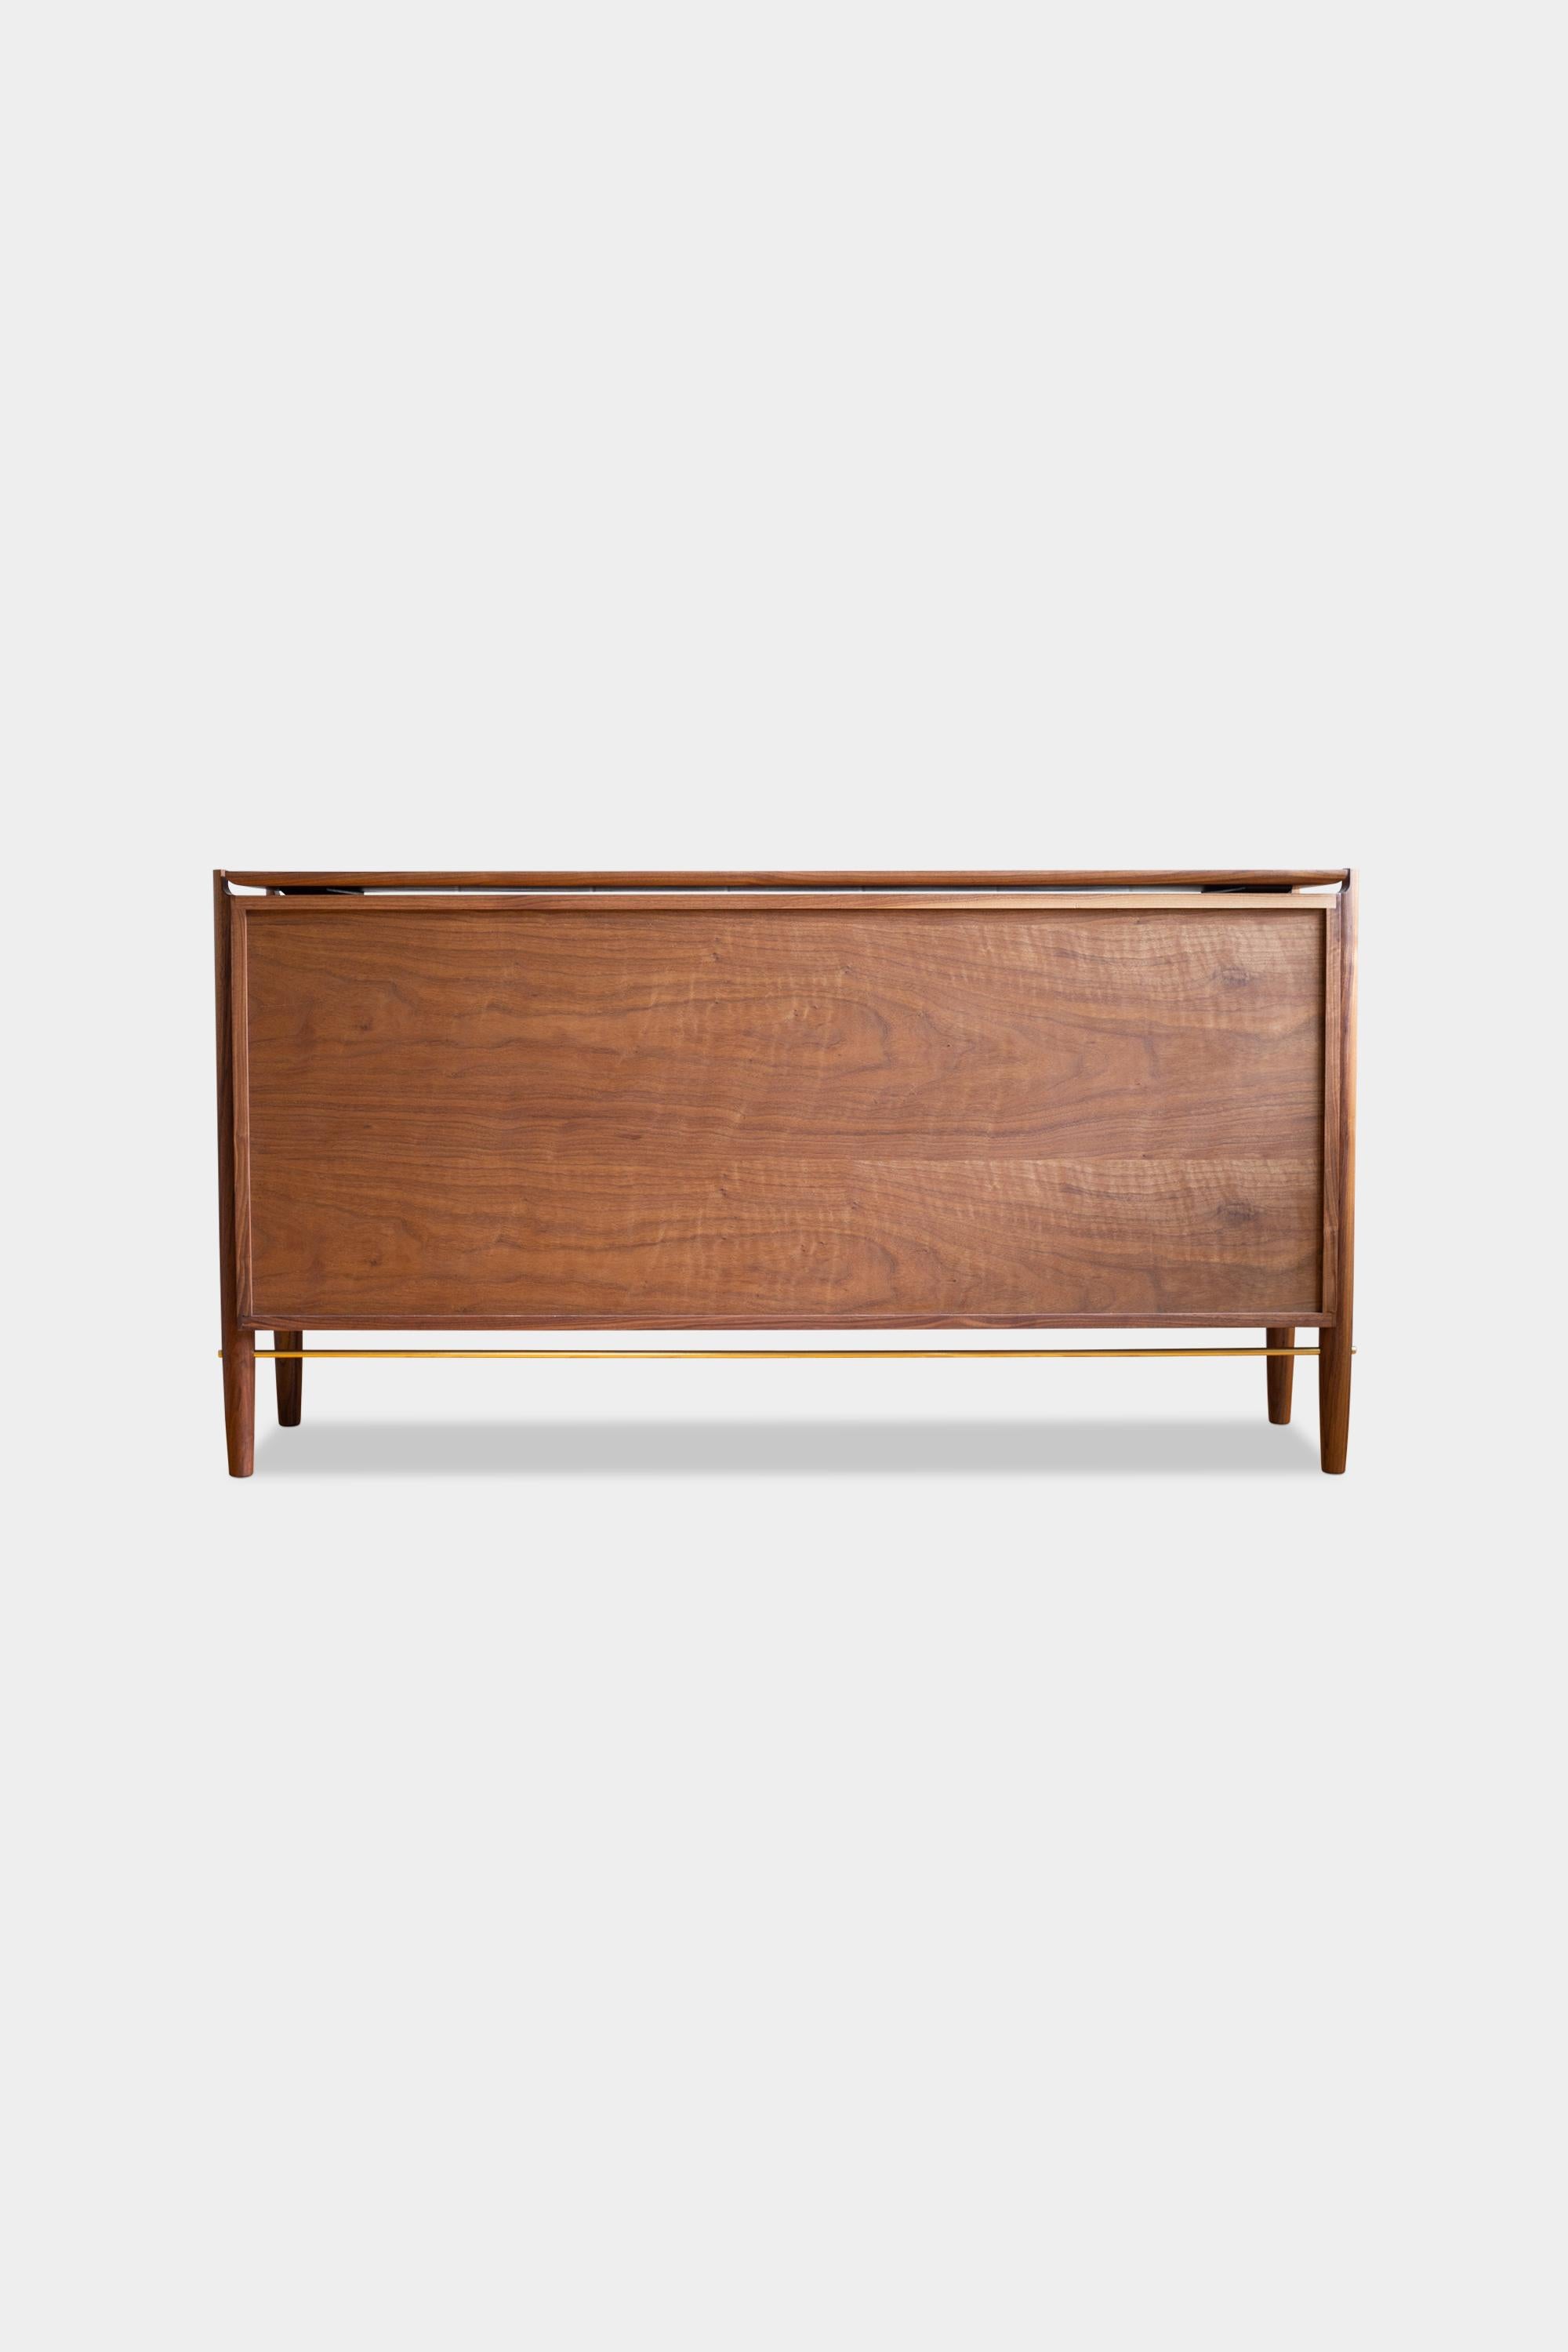 Low KABOT Sideboard in Walnut with 3 Cabinet Doors For Sale 1